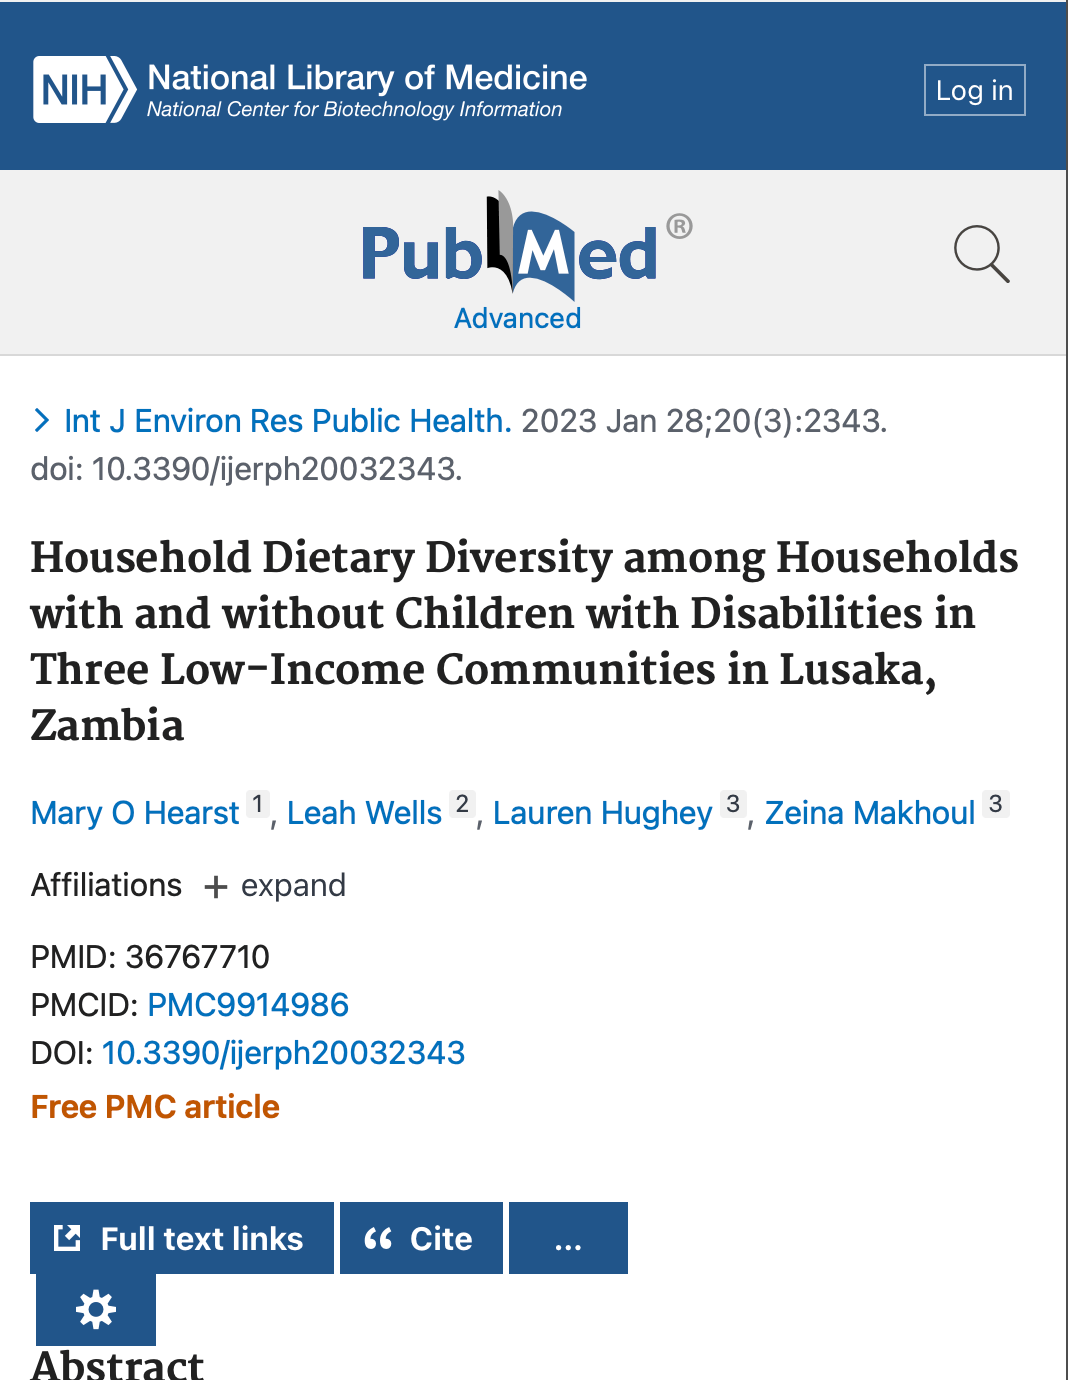 Screenshot of publication "Household Dietary Diversity among Households with and without Children with Disabilities in Three Low-Income Communities in Lusaka, Zambia"